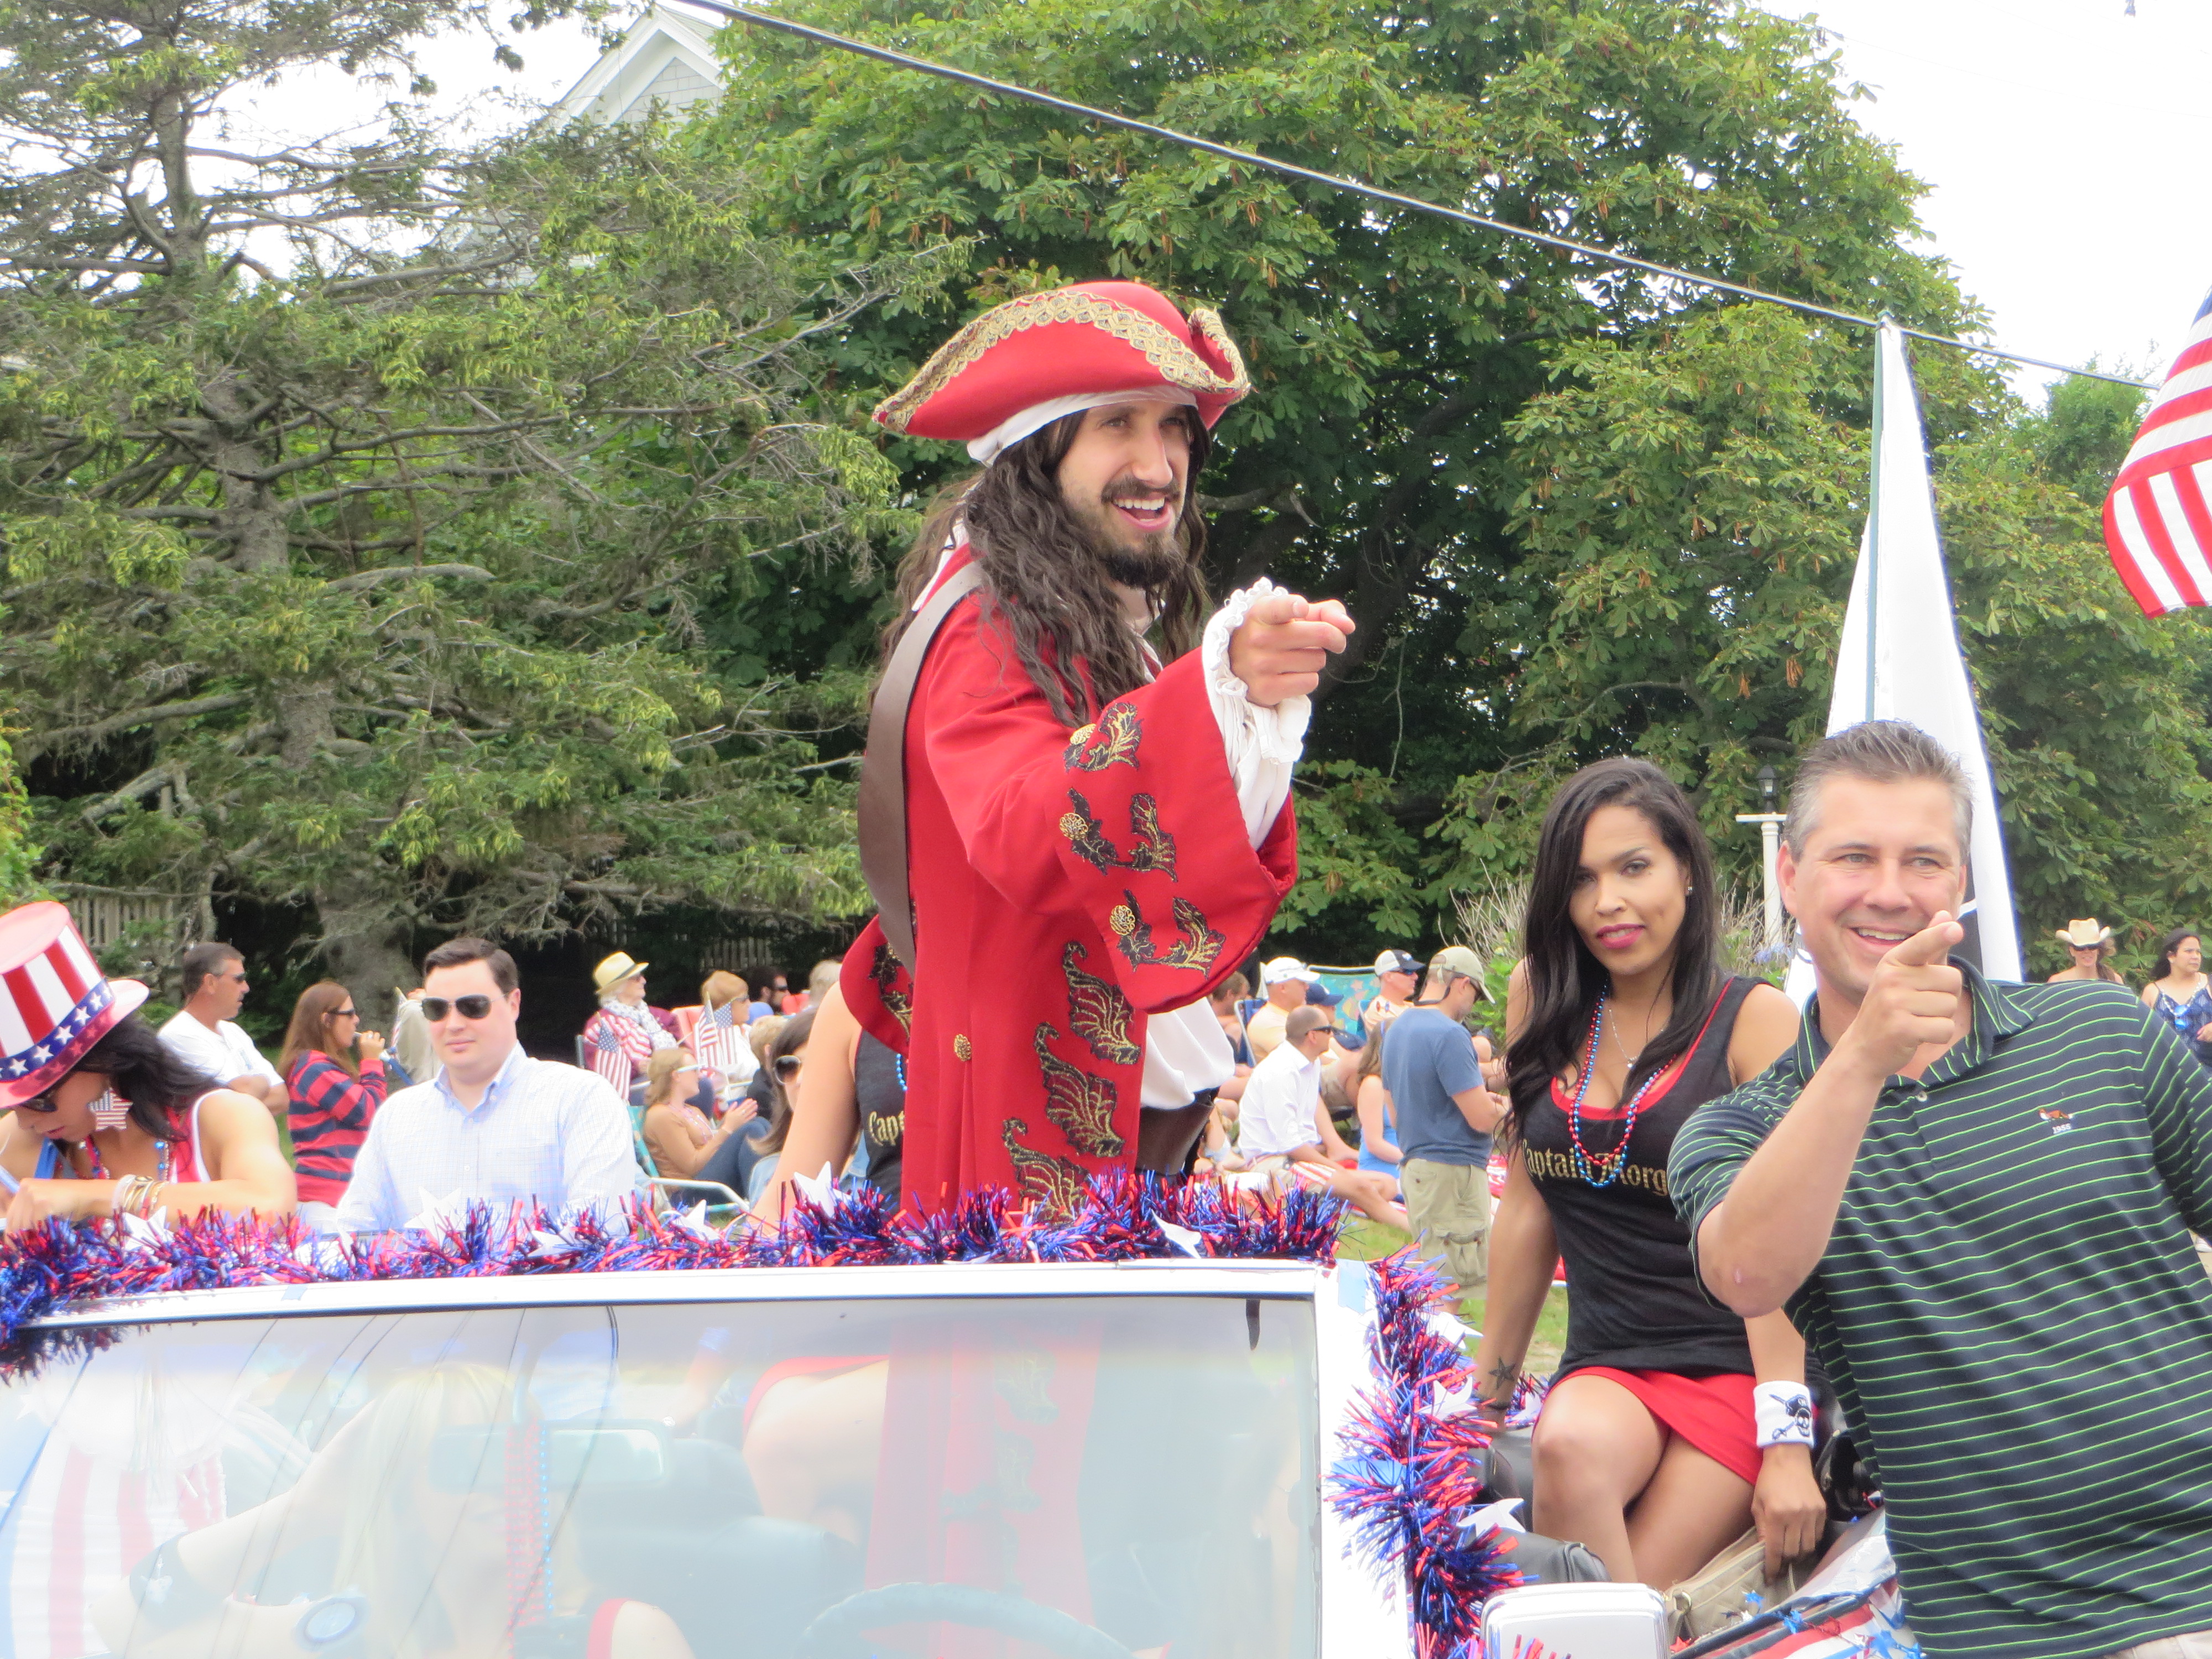 Captain Sparrow joined the parade